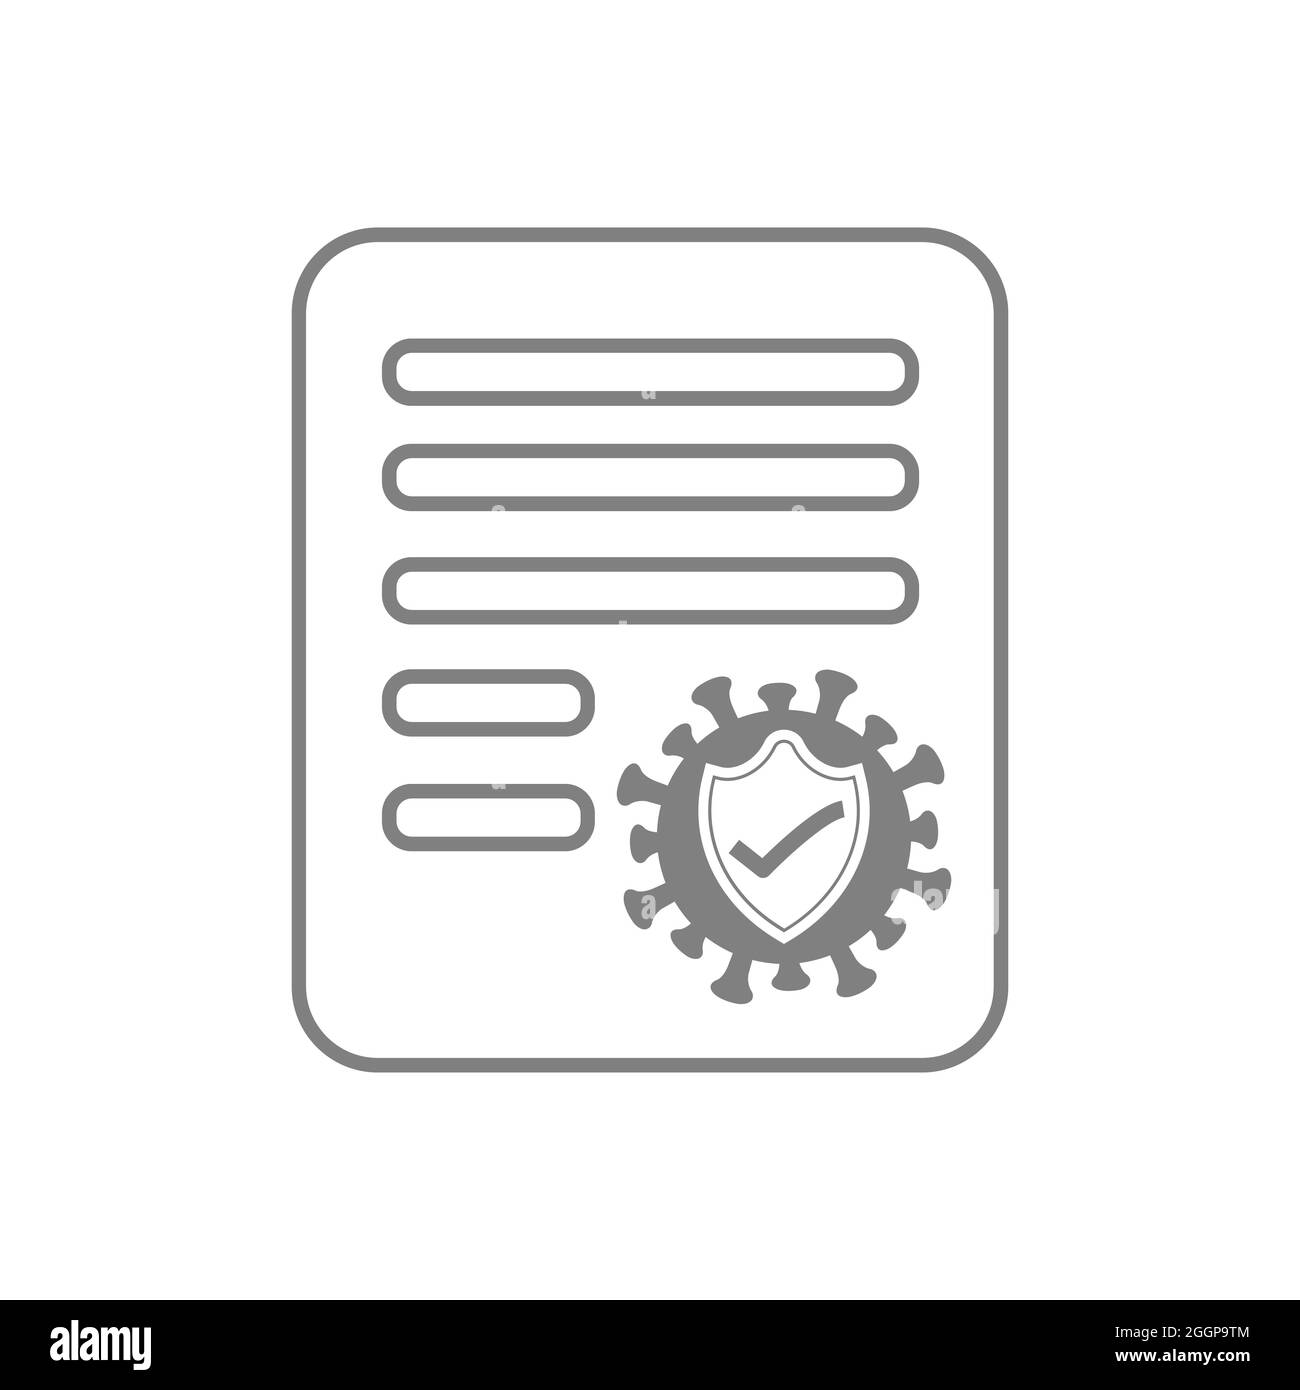 Covid Immunity Certificate or Passport Icon Isolated Stock Vector